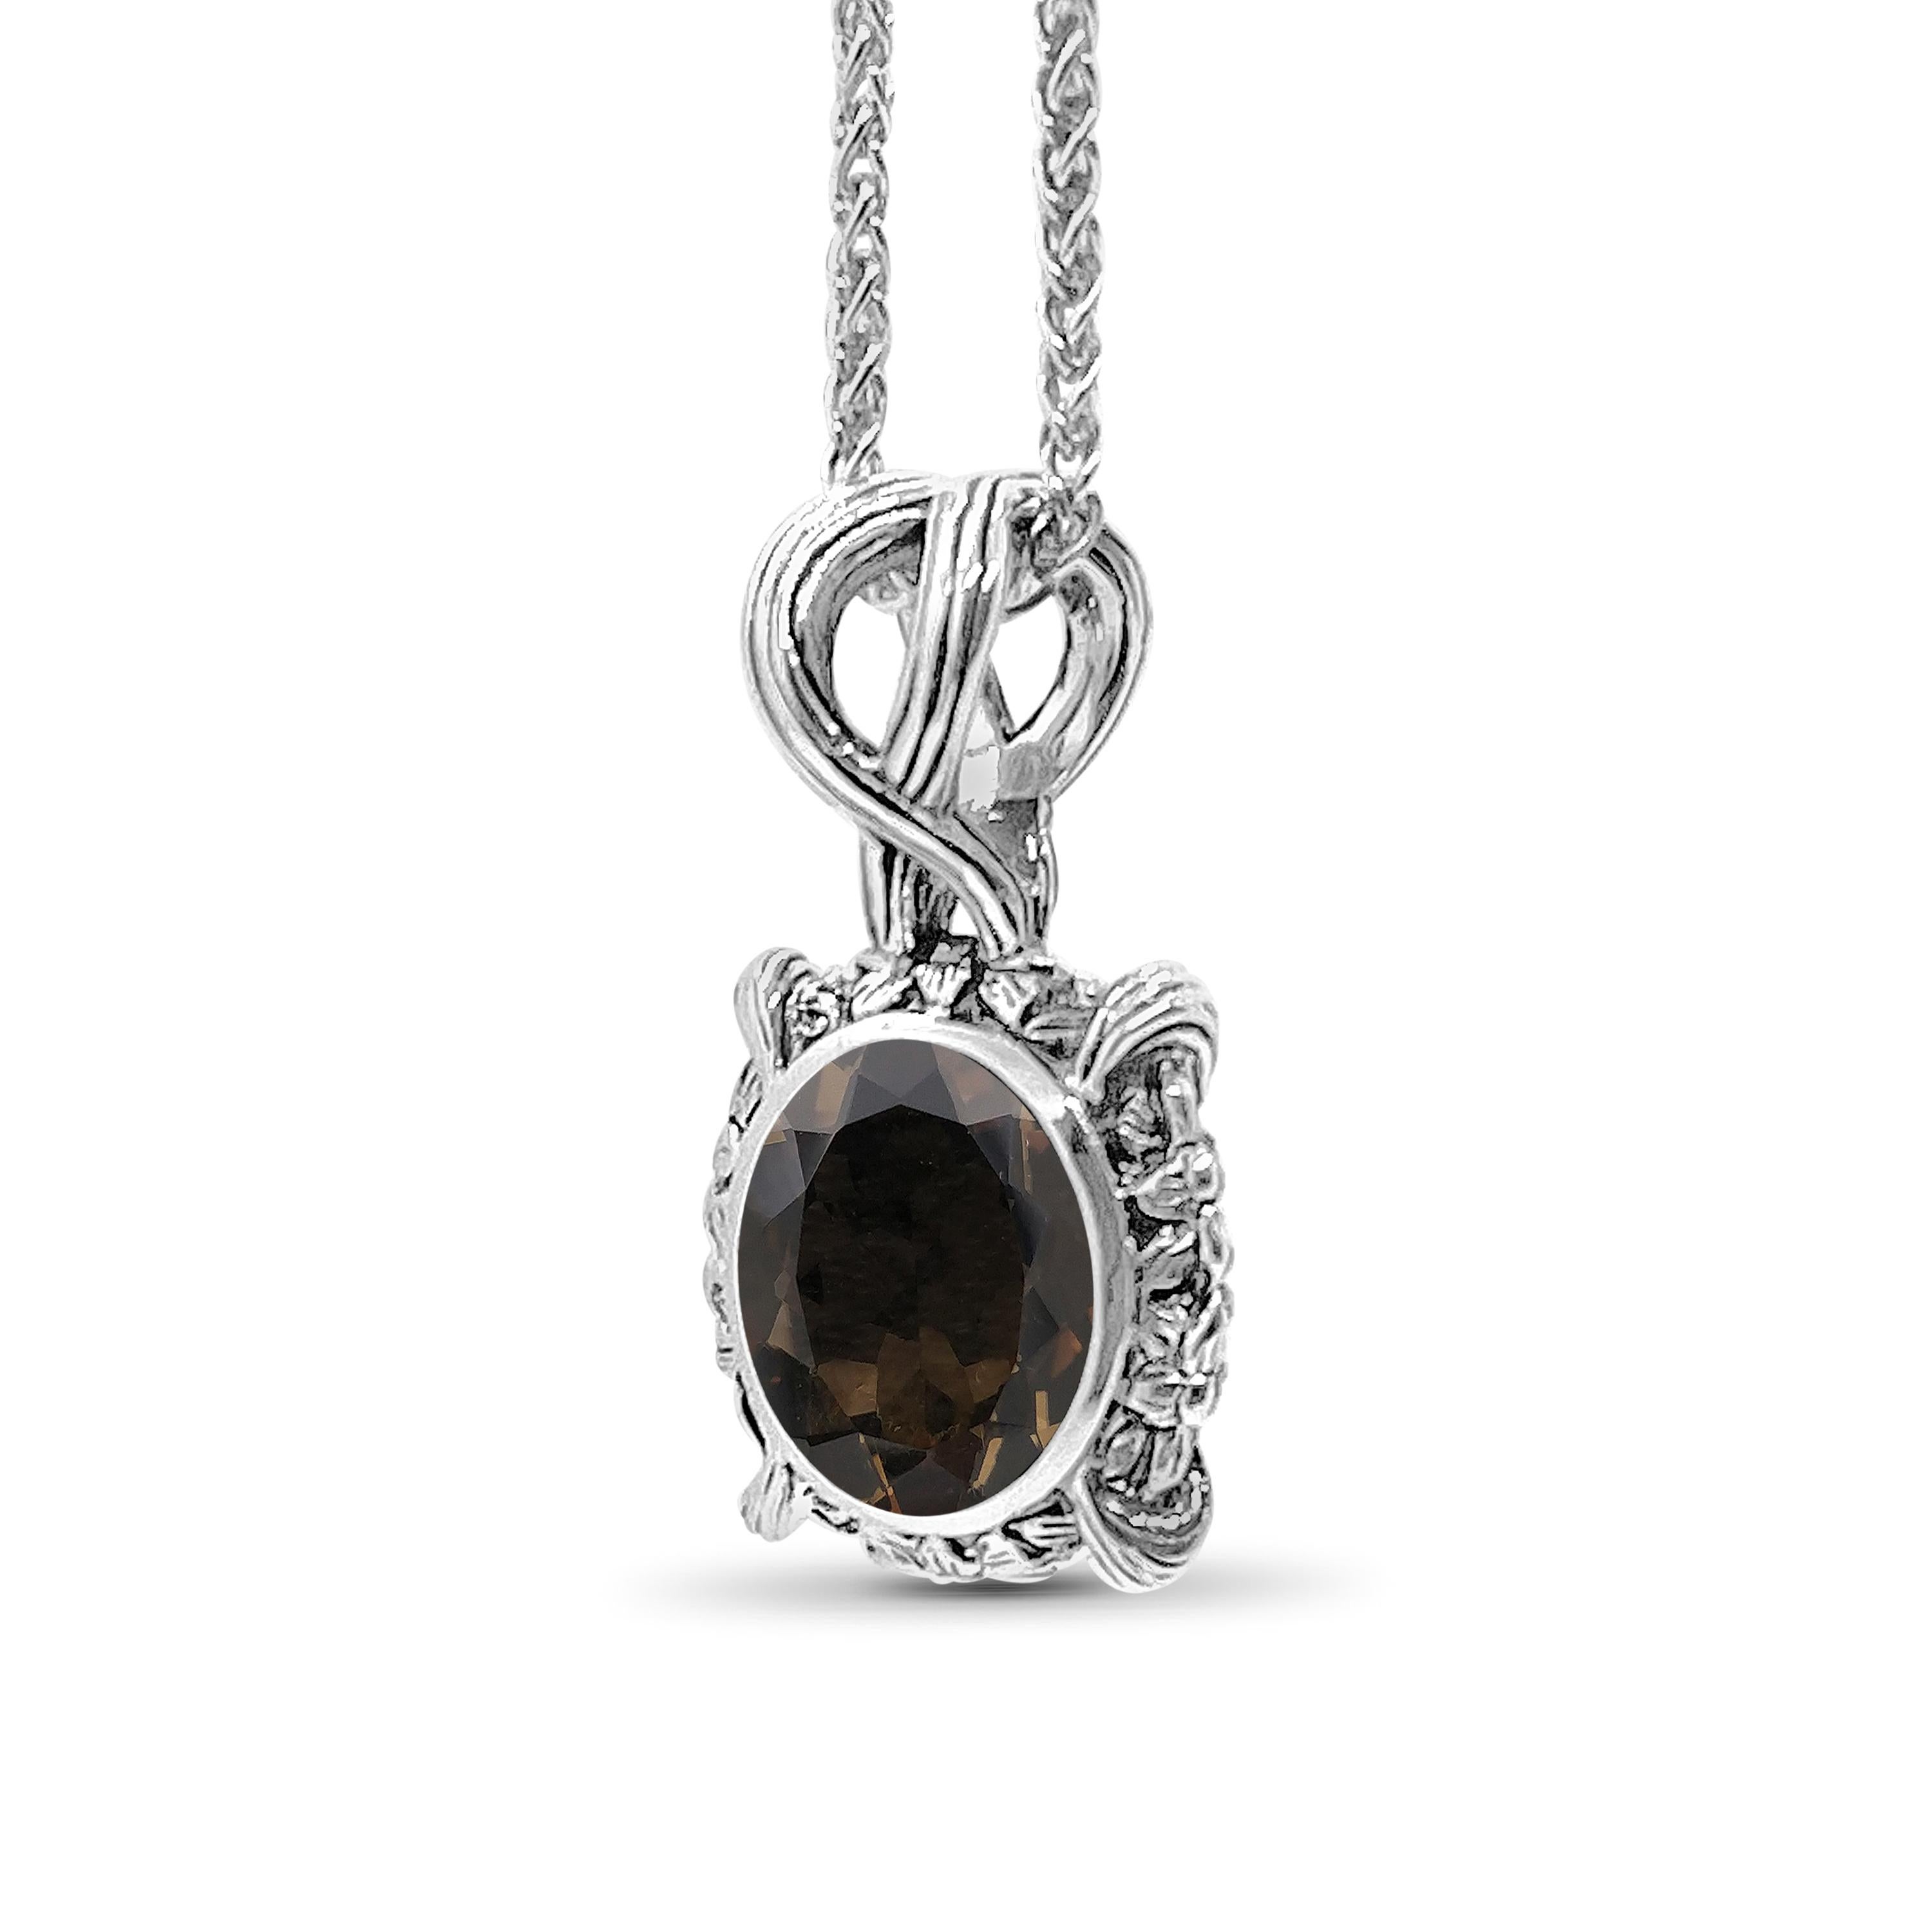 Introducing a breathtaking masterpiece from Stephen Dweck, an exquisite jewelry designer renowned for his unparalleled creativity and attention to detail. Behold the captivating Oval Smokey Quartz Pendant, an opulent adornment that exudes timeless